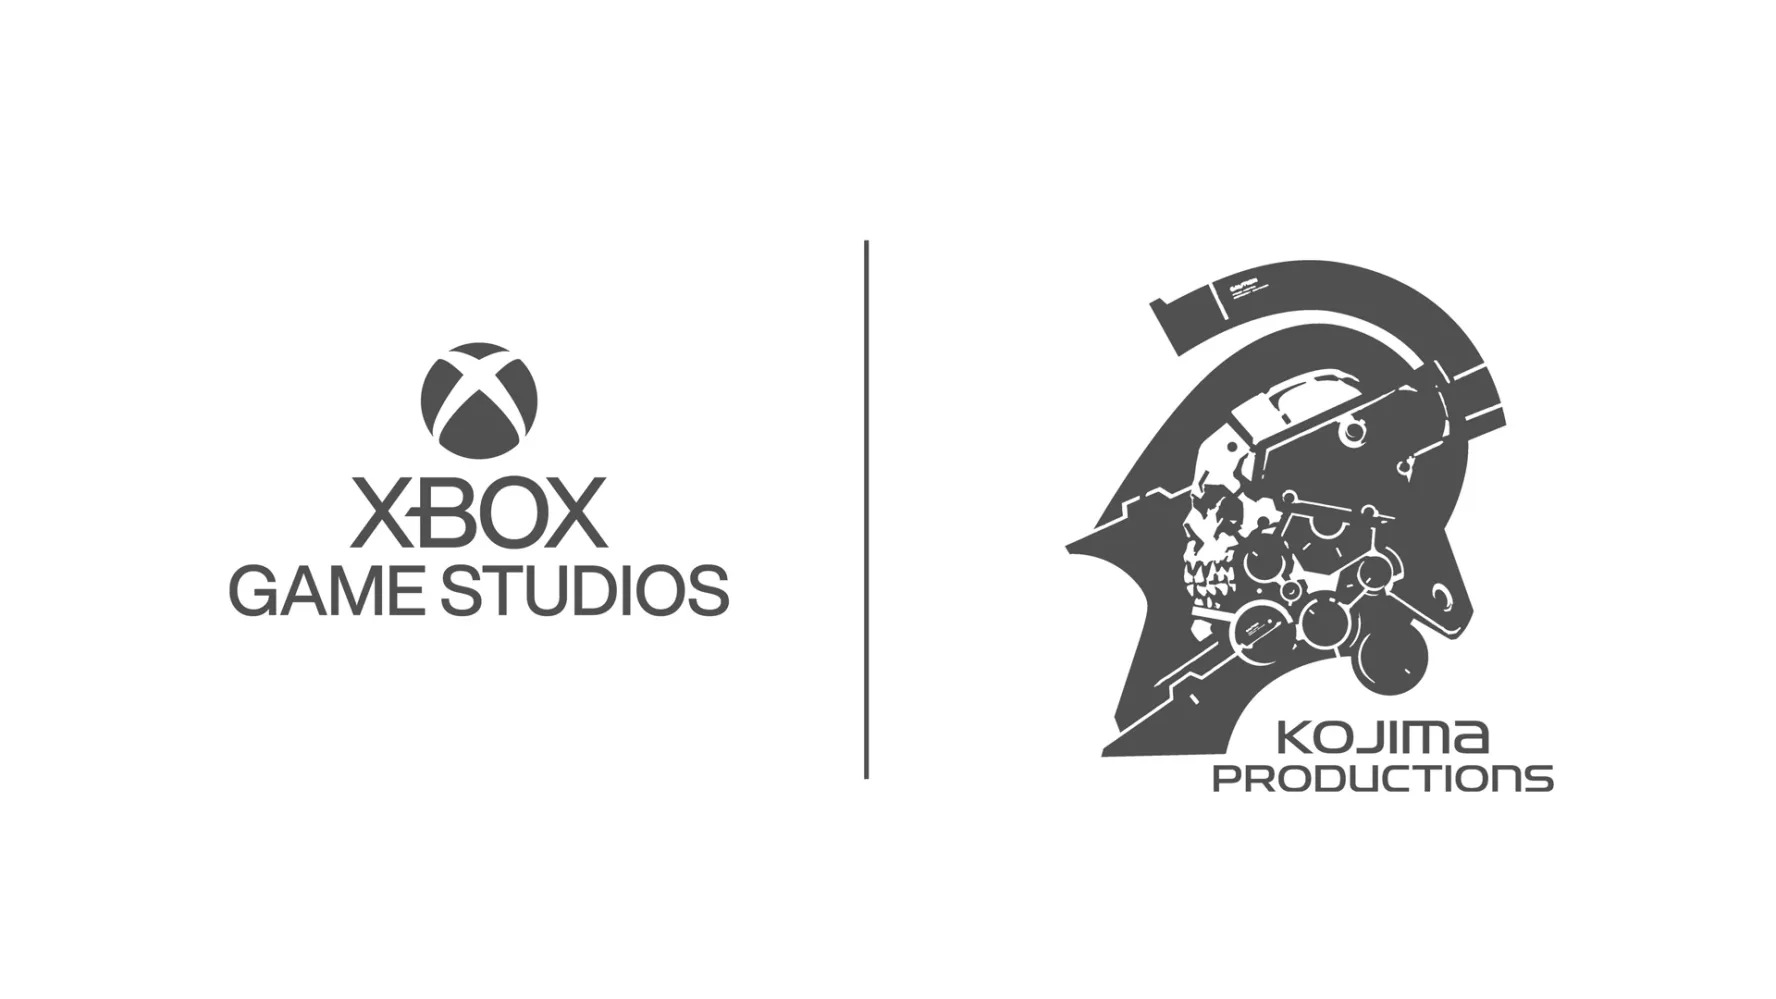 Xbox Game Studios and Kojima Productions are teaming up.